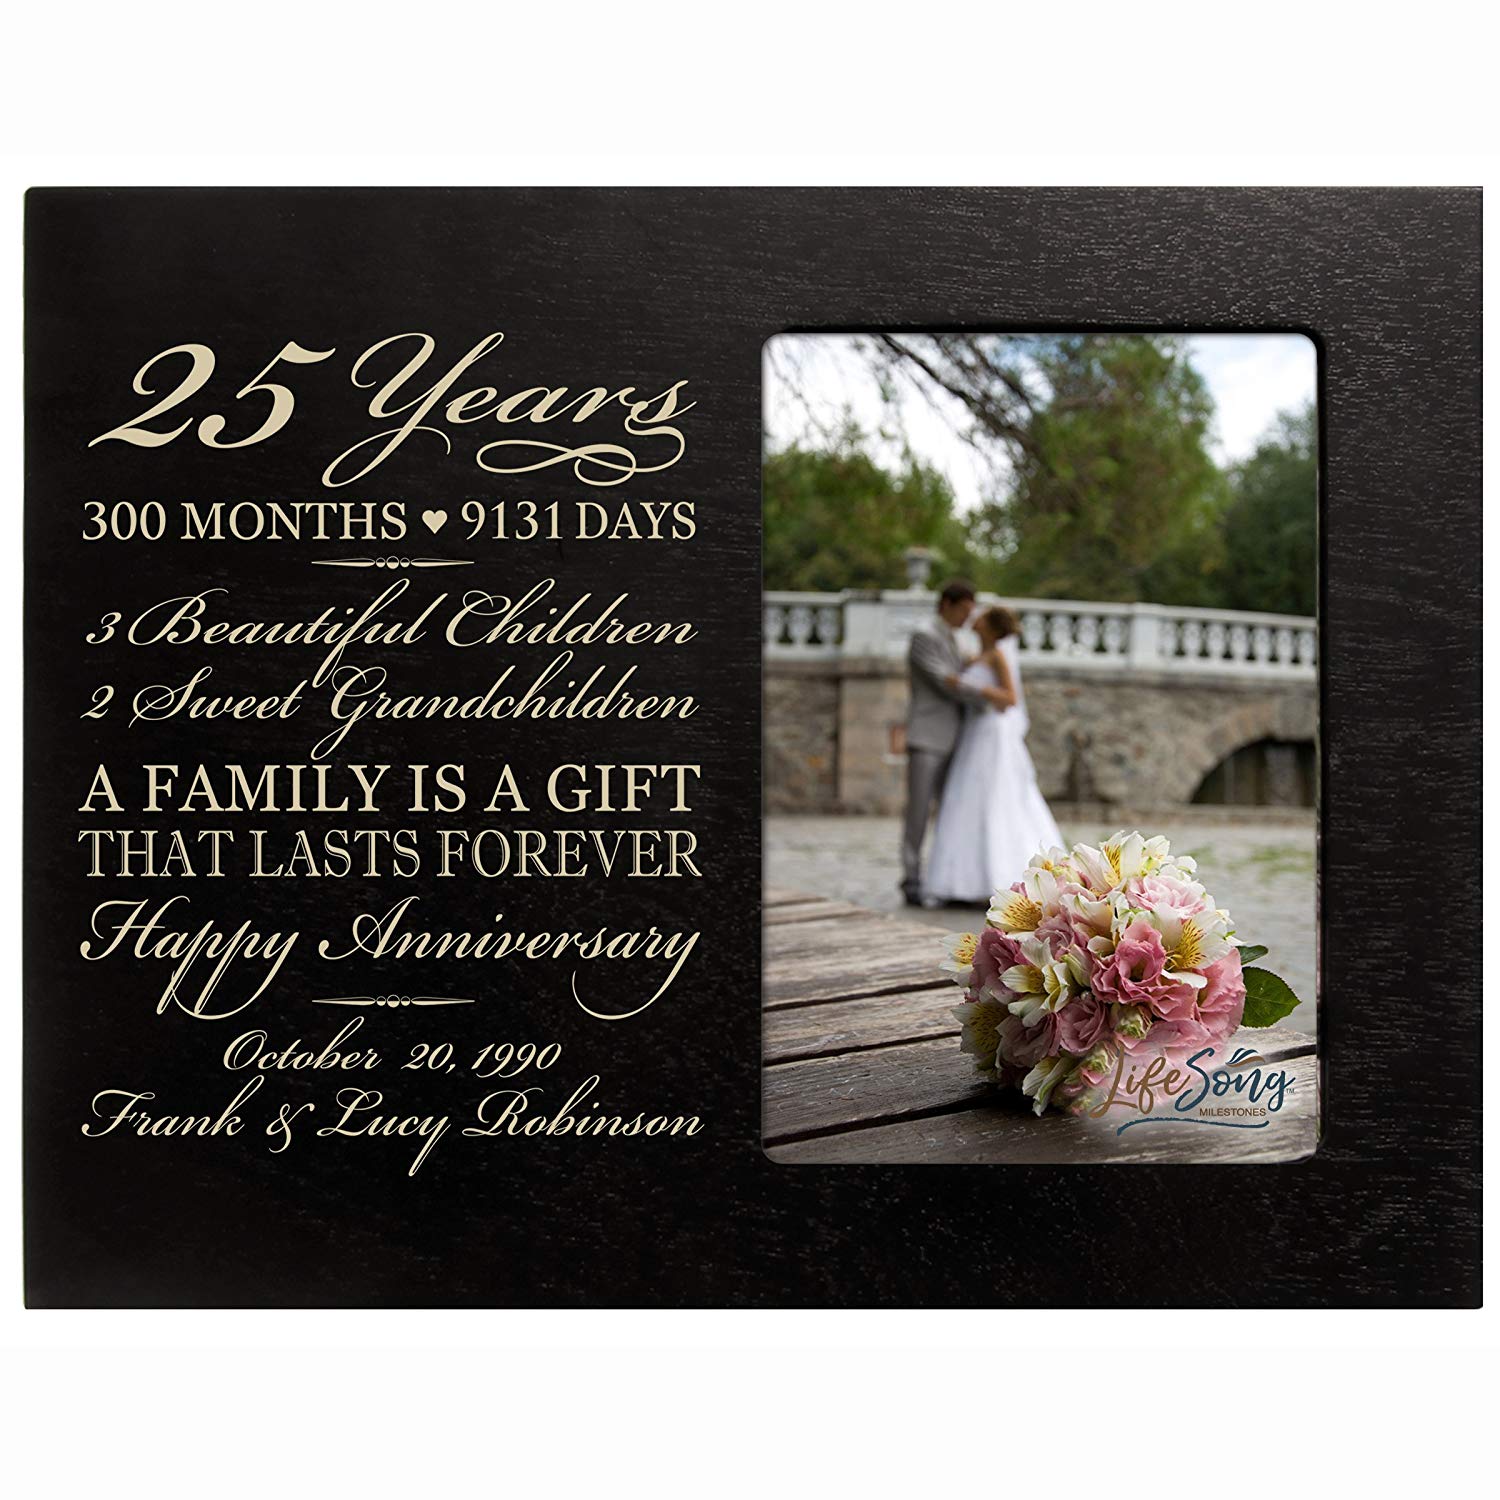 Lifesong Milestones Personalized Unique 25th Wedding Anniversary Picture Frame for Couples